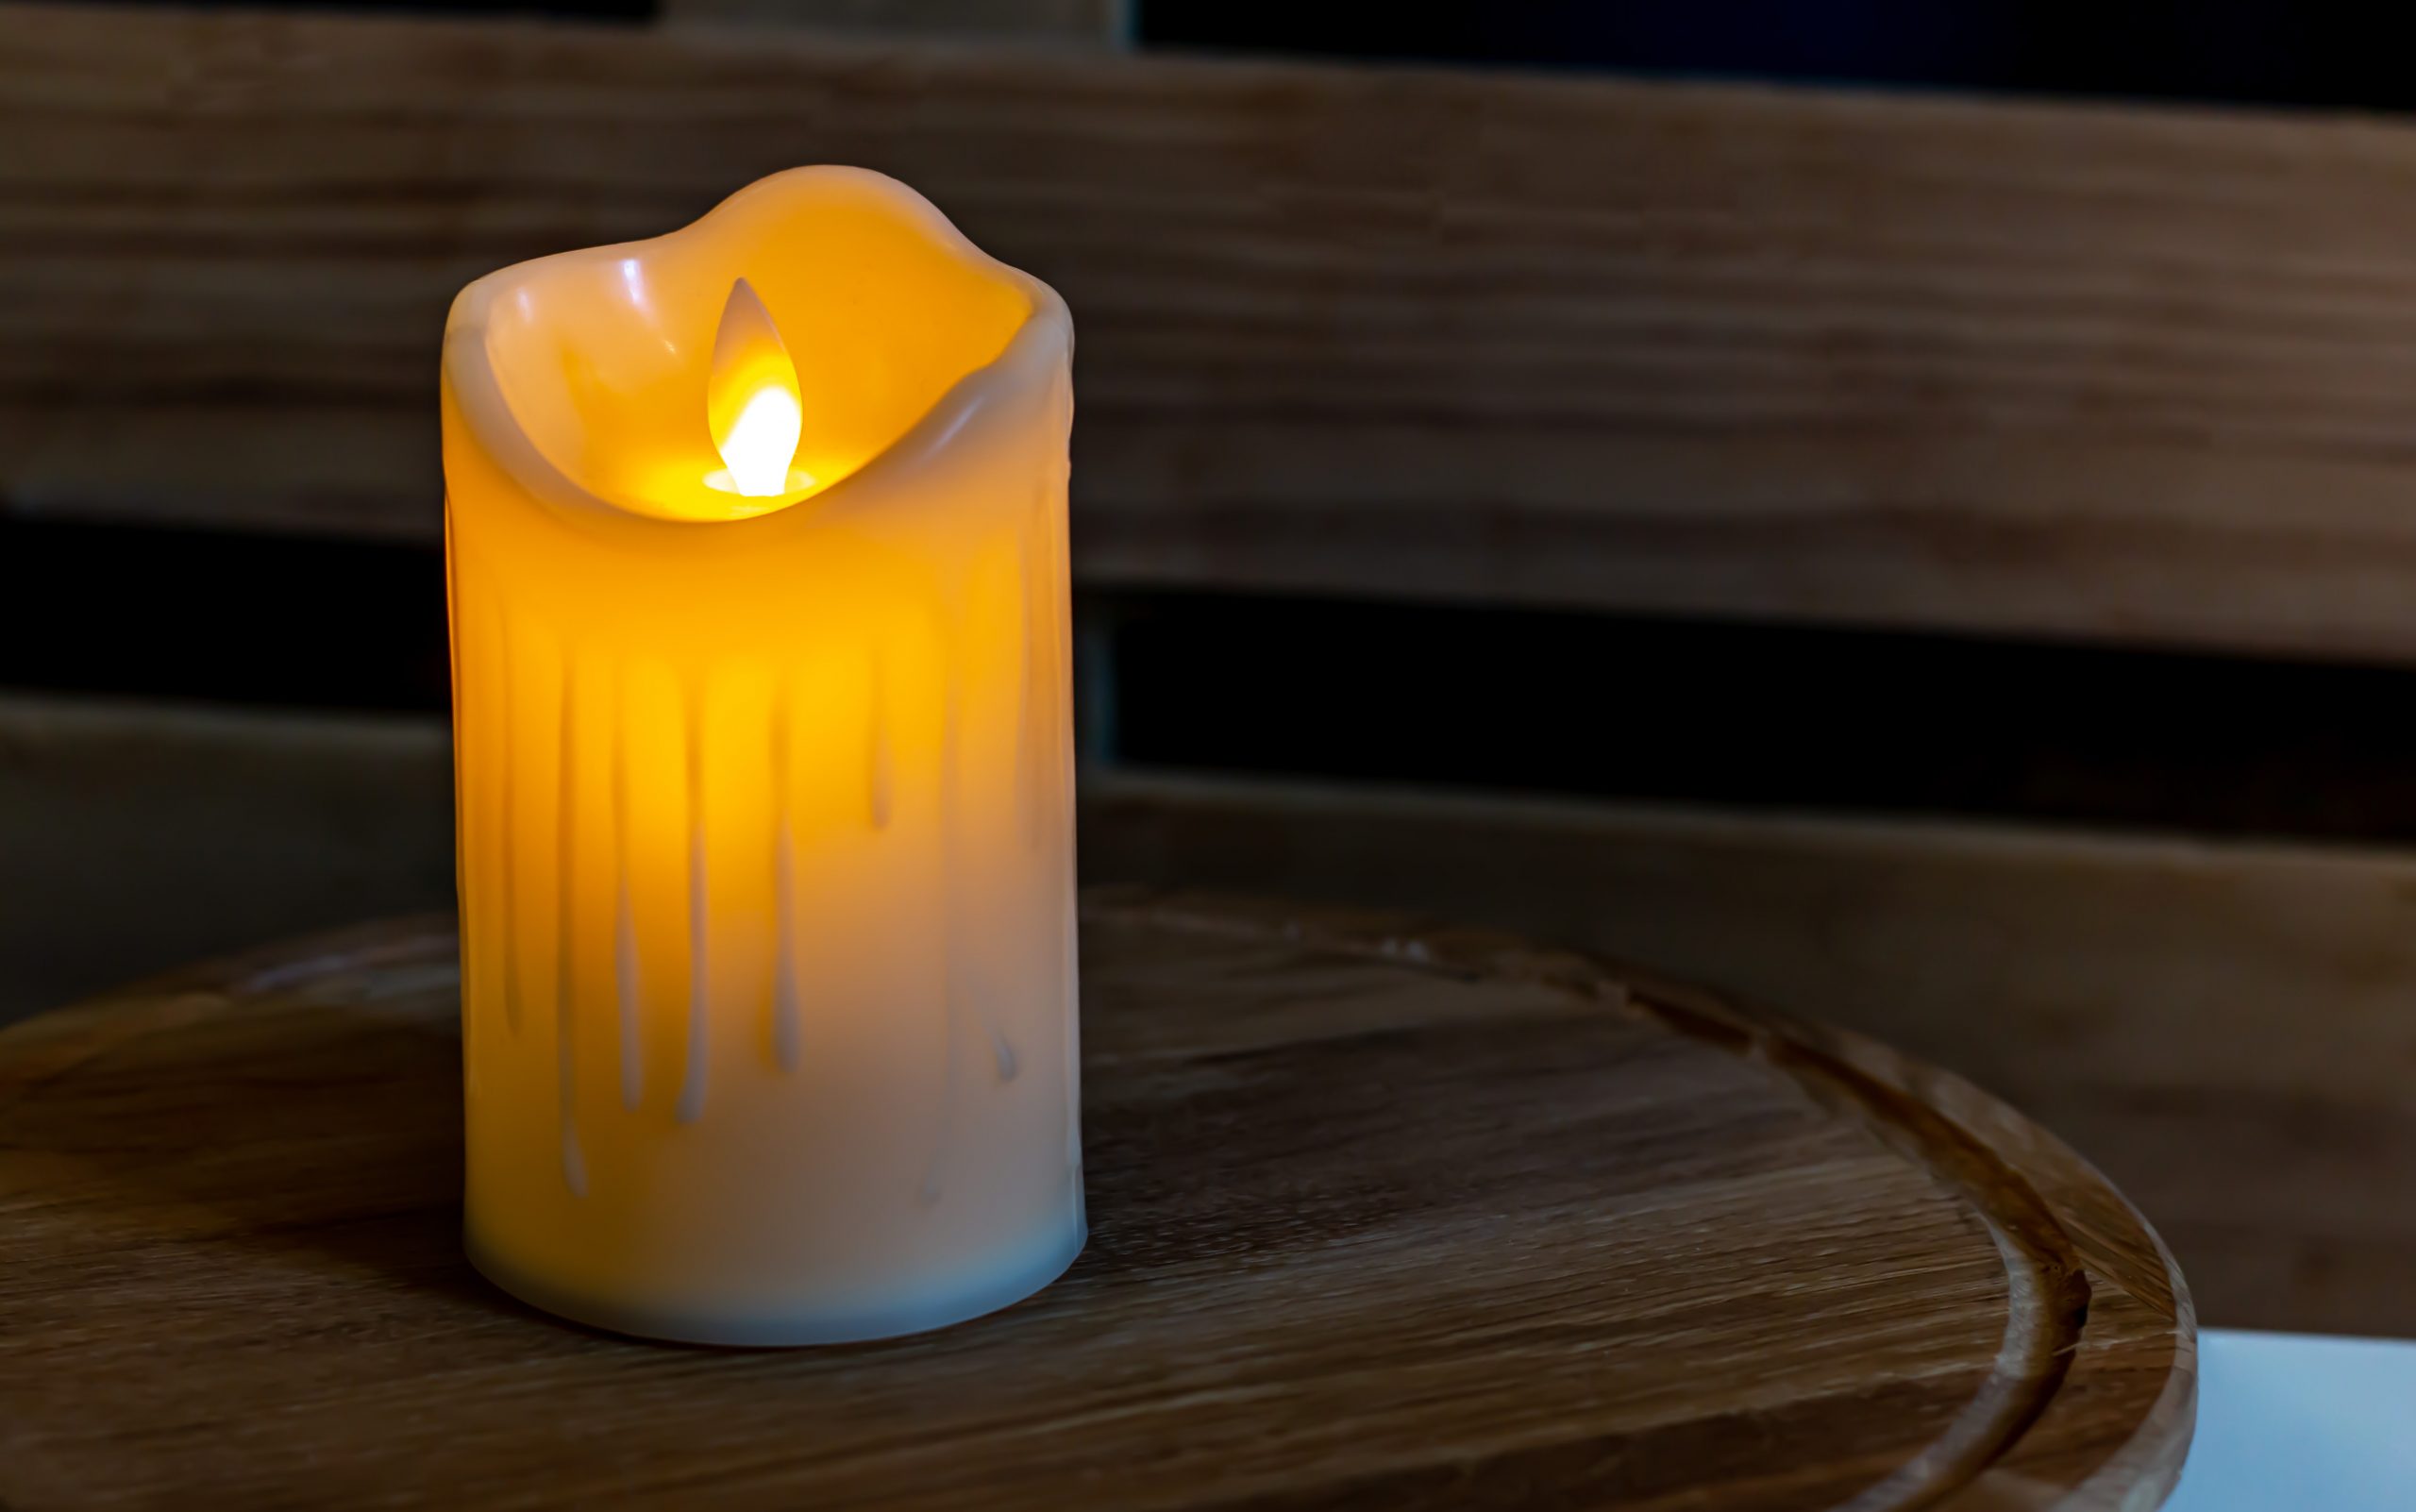 Super bright battery operated candles